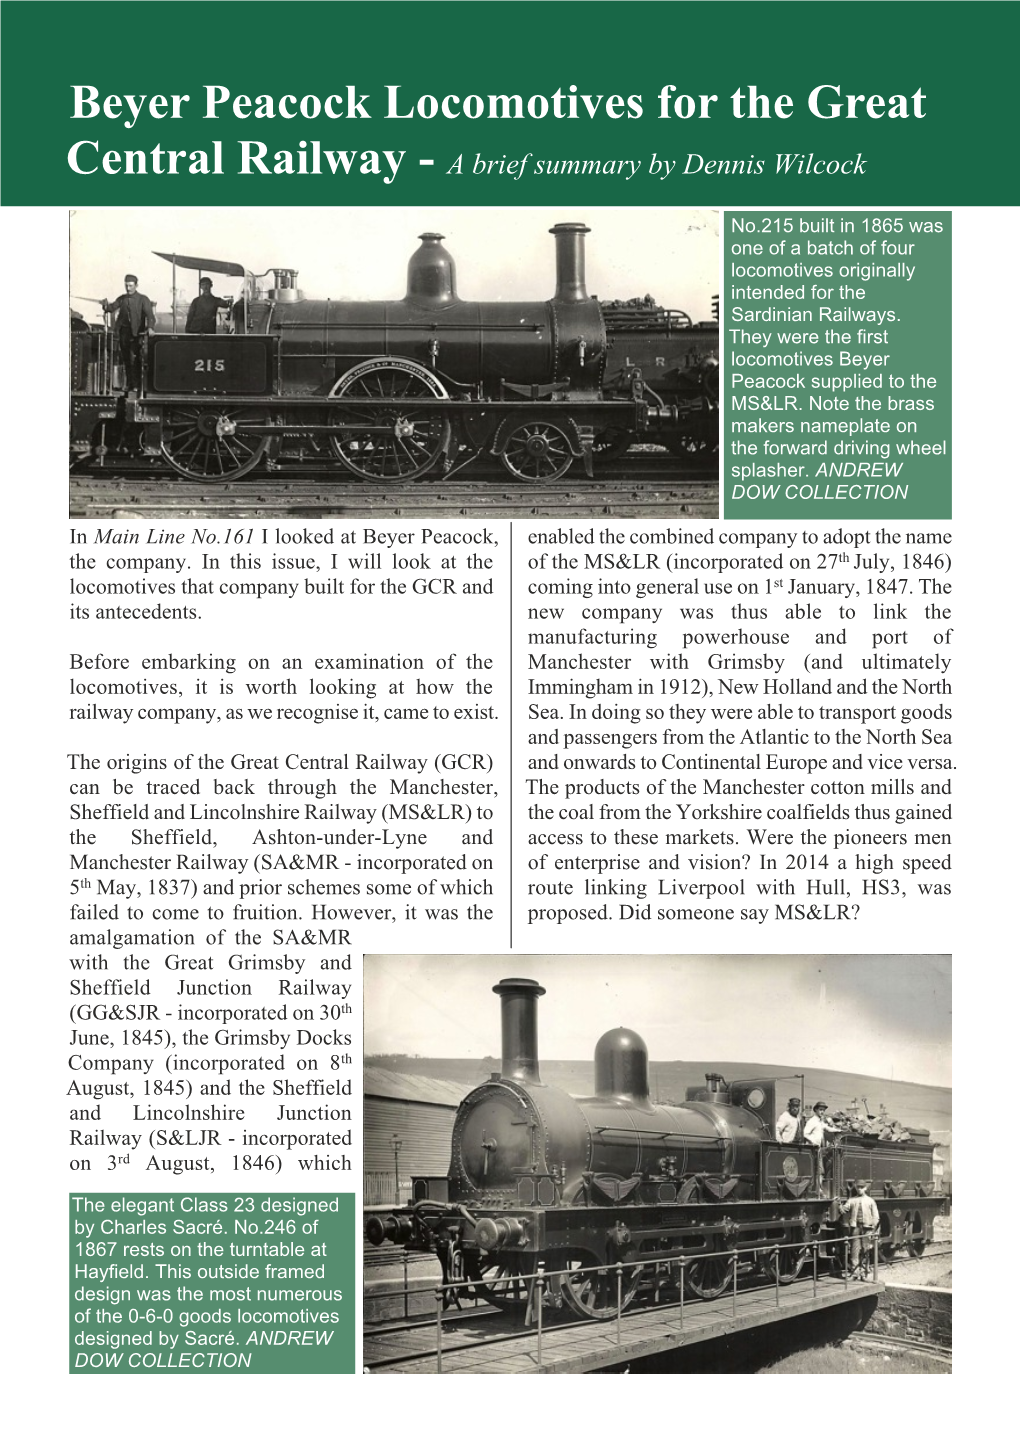 Beyer Peacock Locomotives for the Great Central Railway - a Brief Summary by Dennis Wilcock